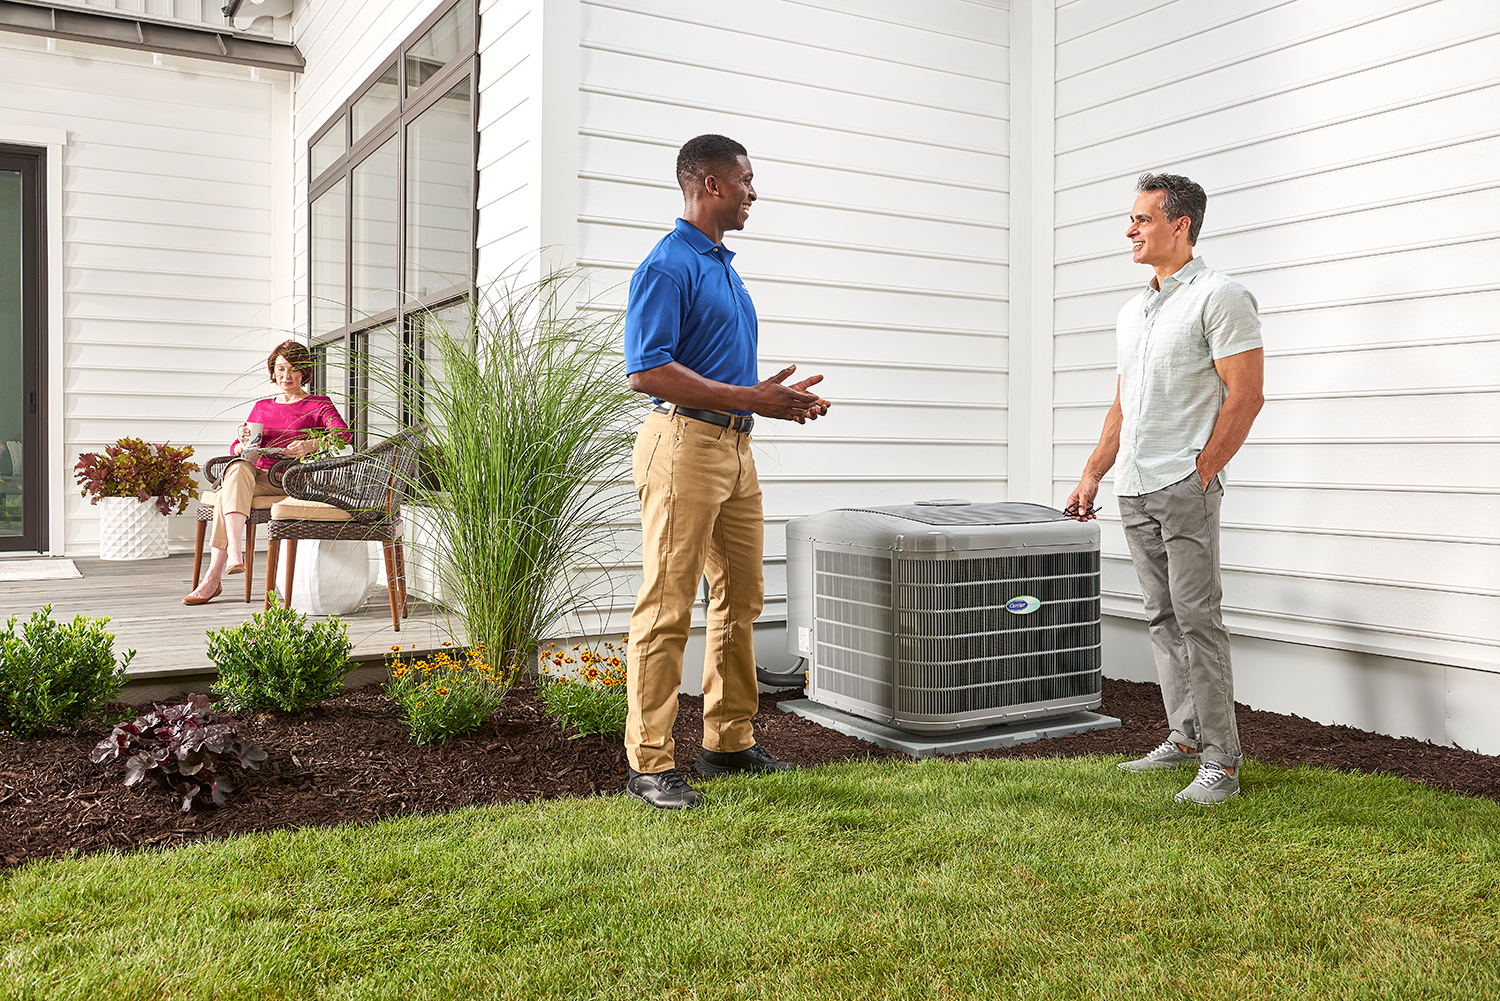 Top Rated Heating and Air Service Grove Hill AL